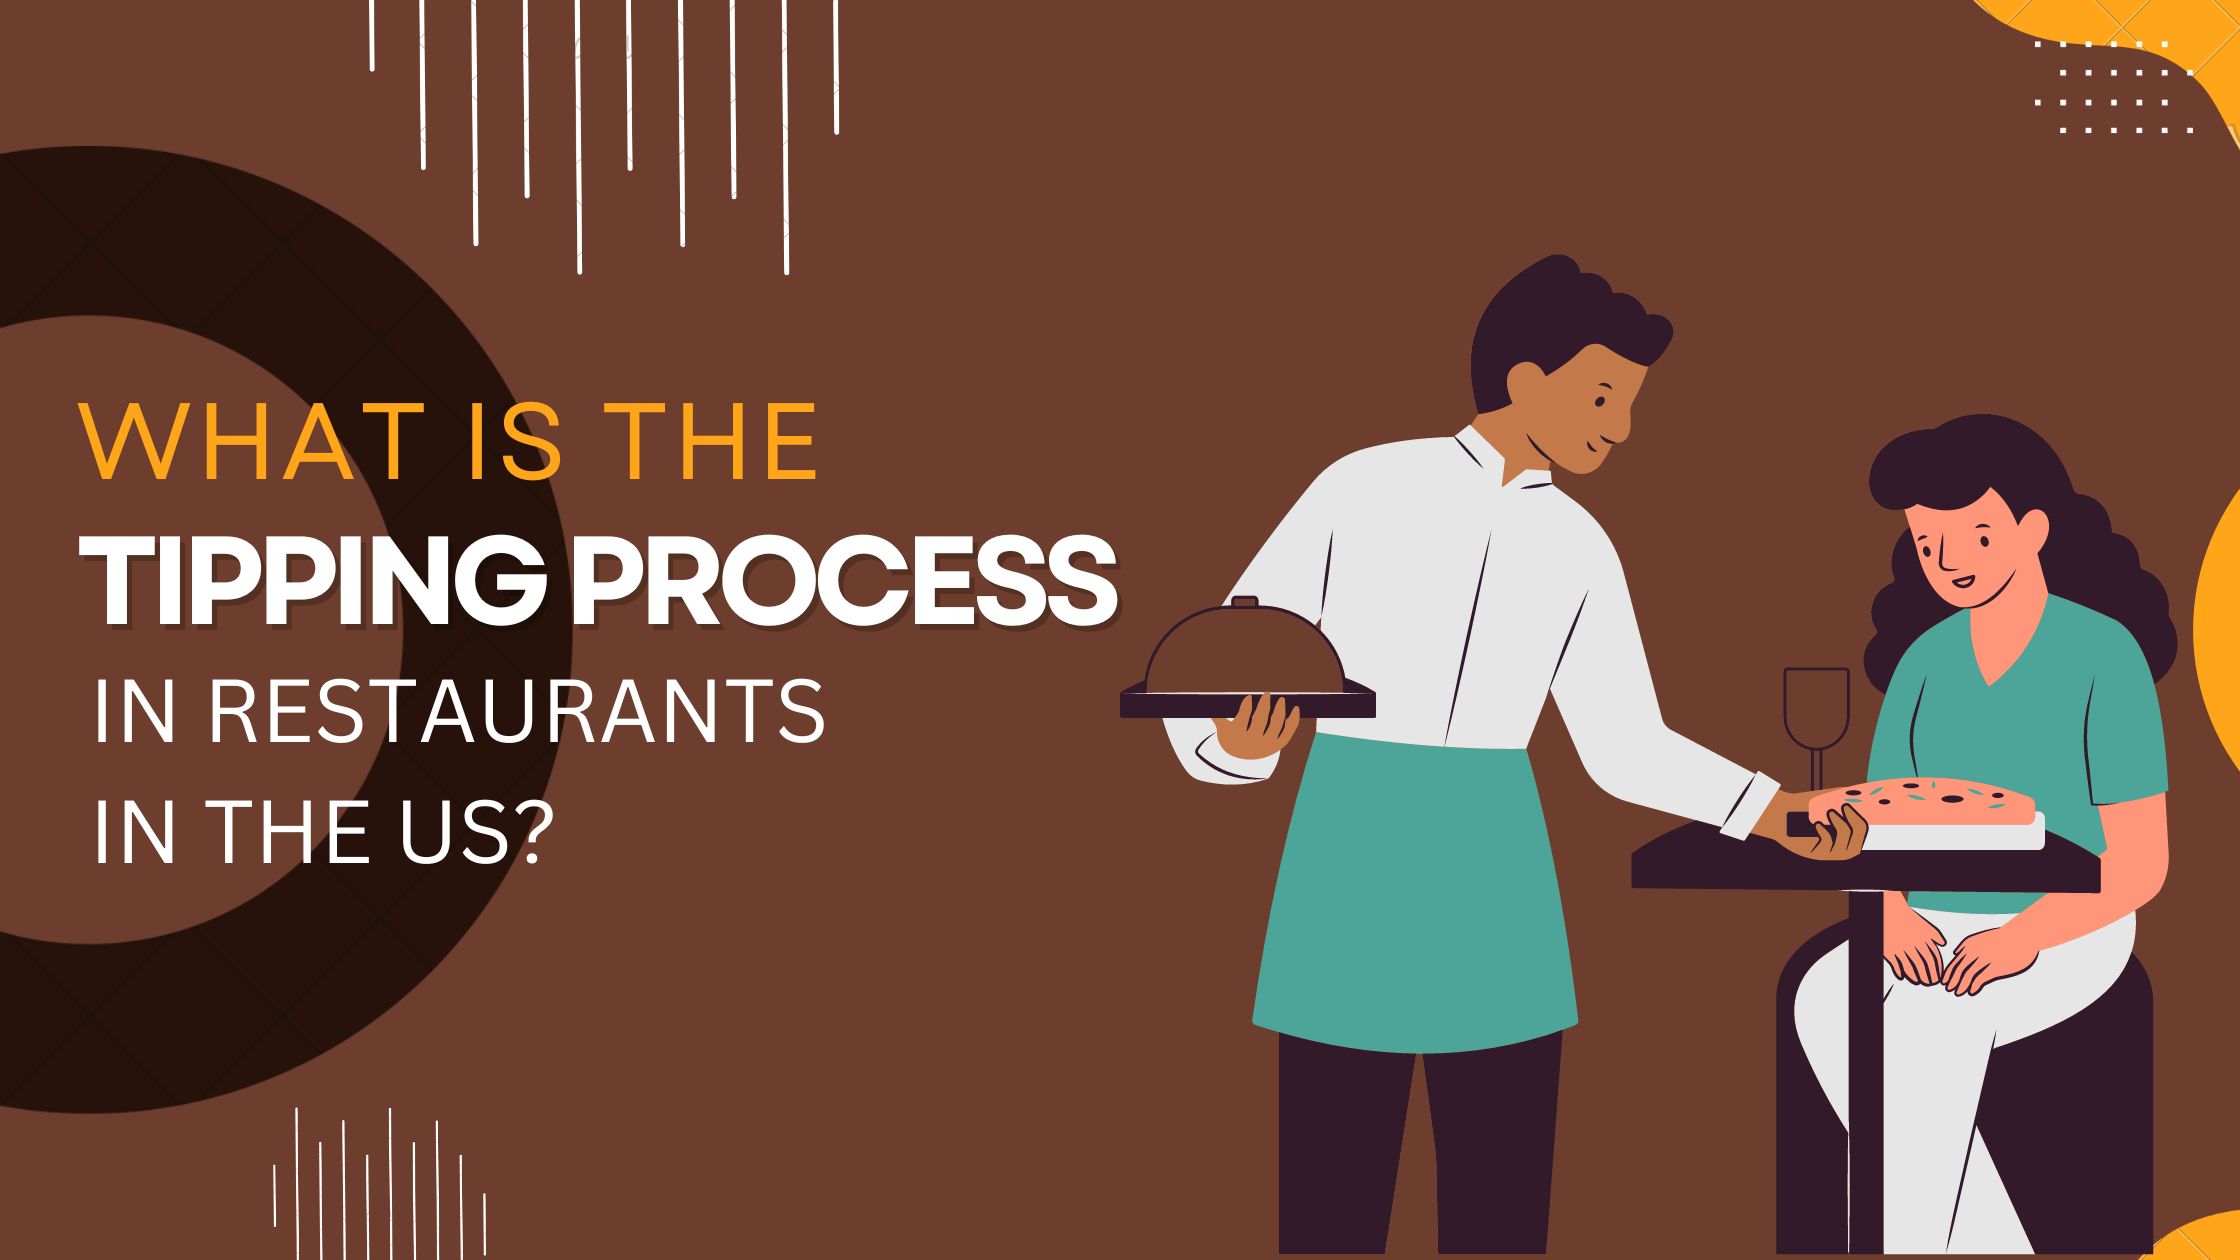 What Is The Tipping Process In Restaurants In The US